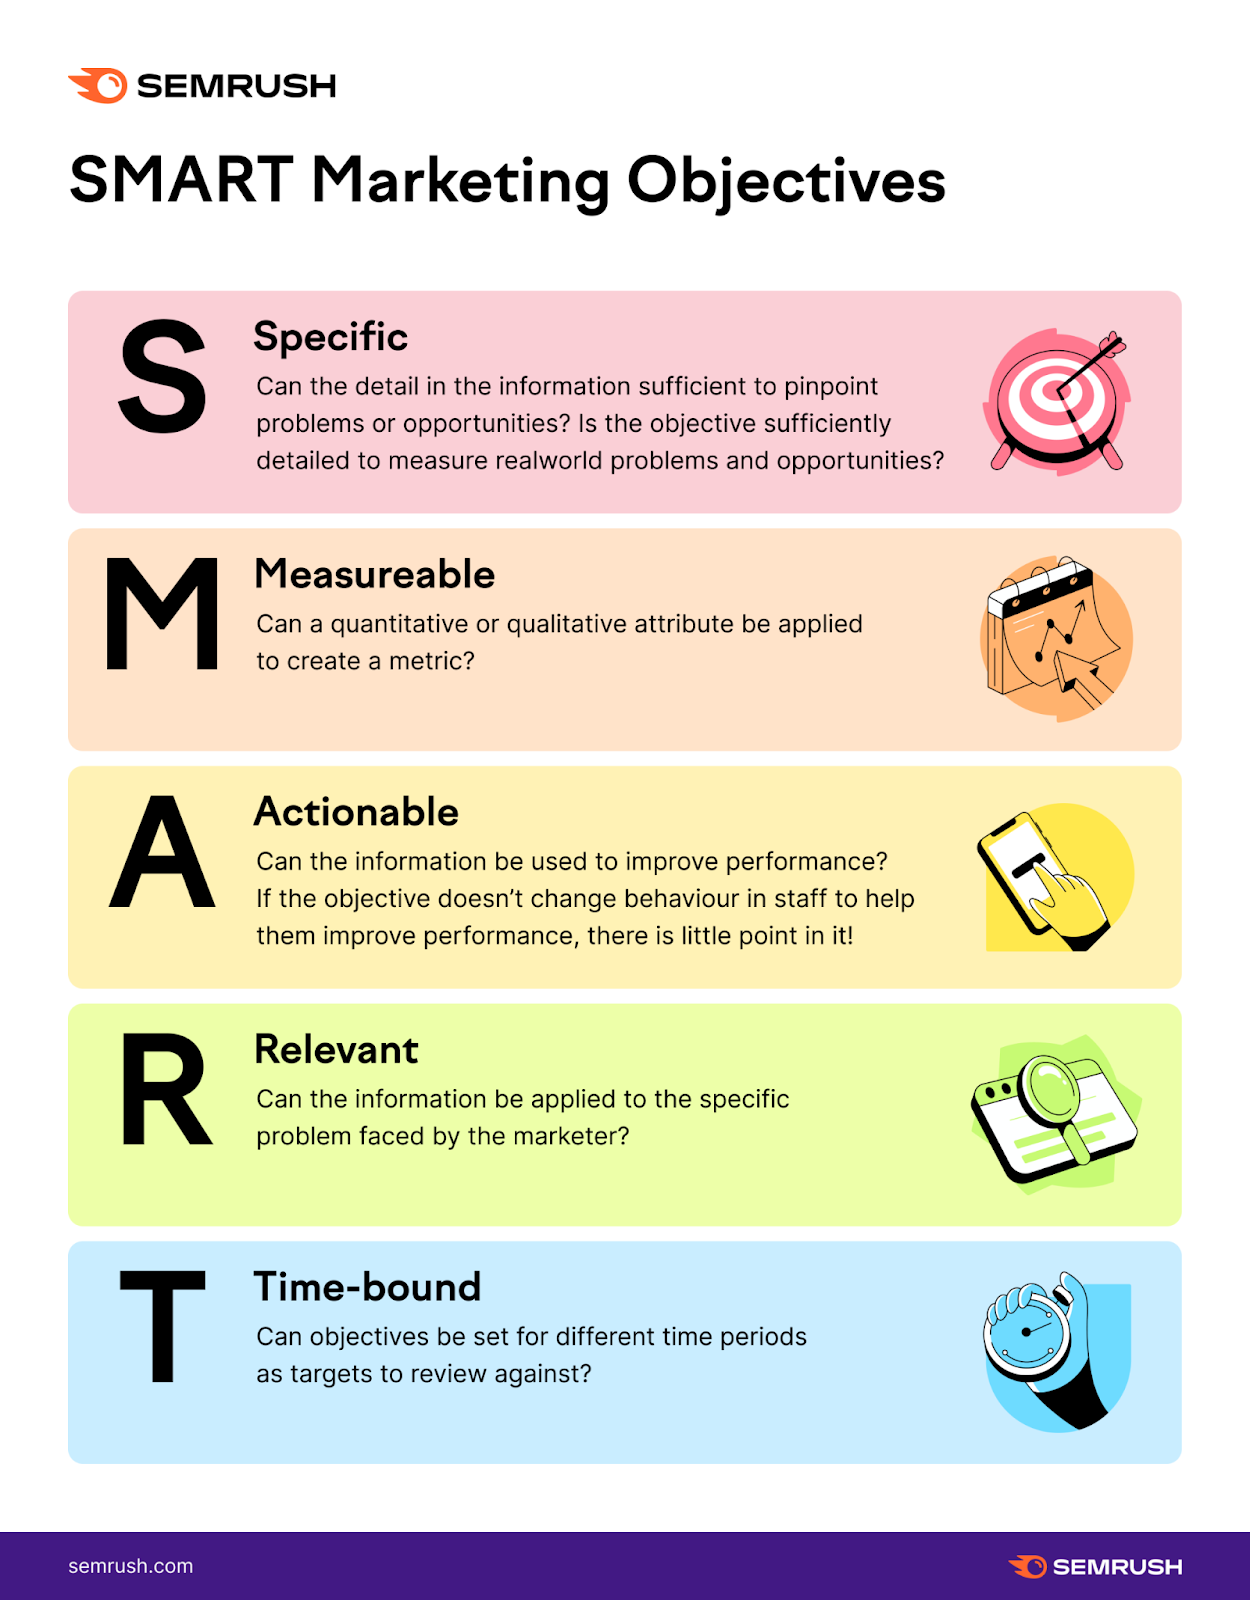 An infographic explaining what "SMART" marketing objectives stand for